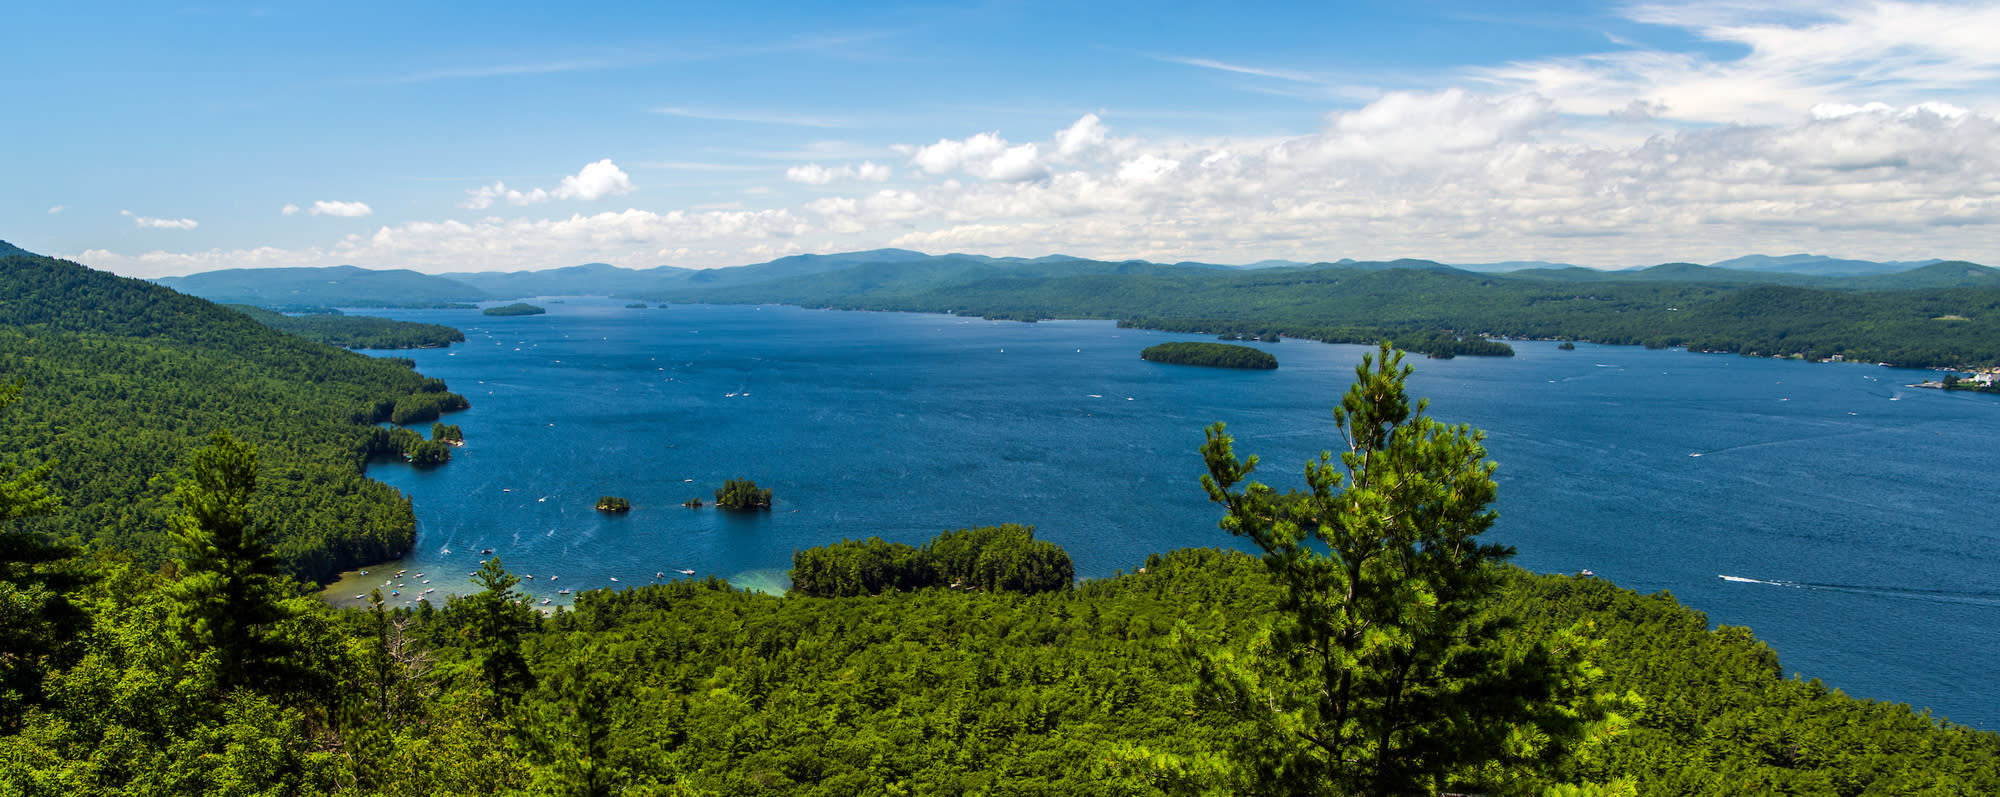 An aerial view of Lake George from Shelving Rock in the Adirondacks